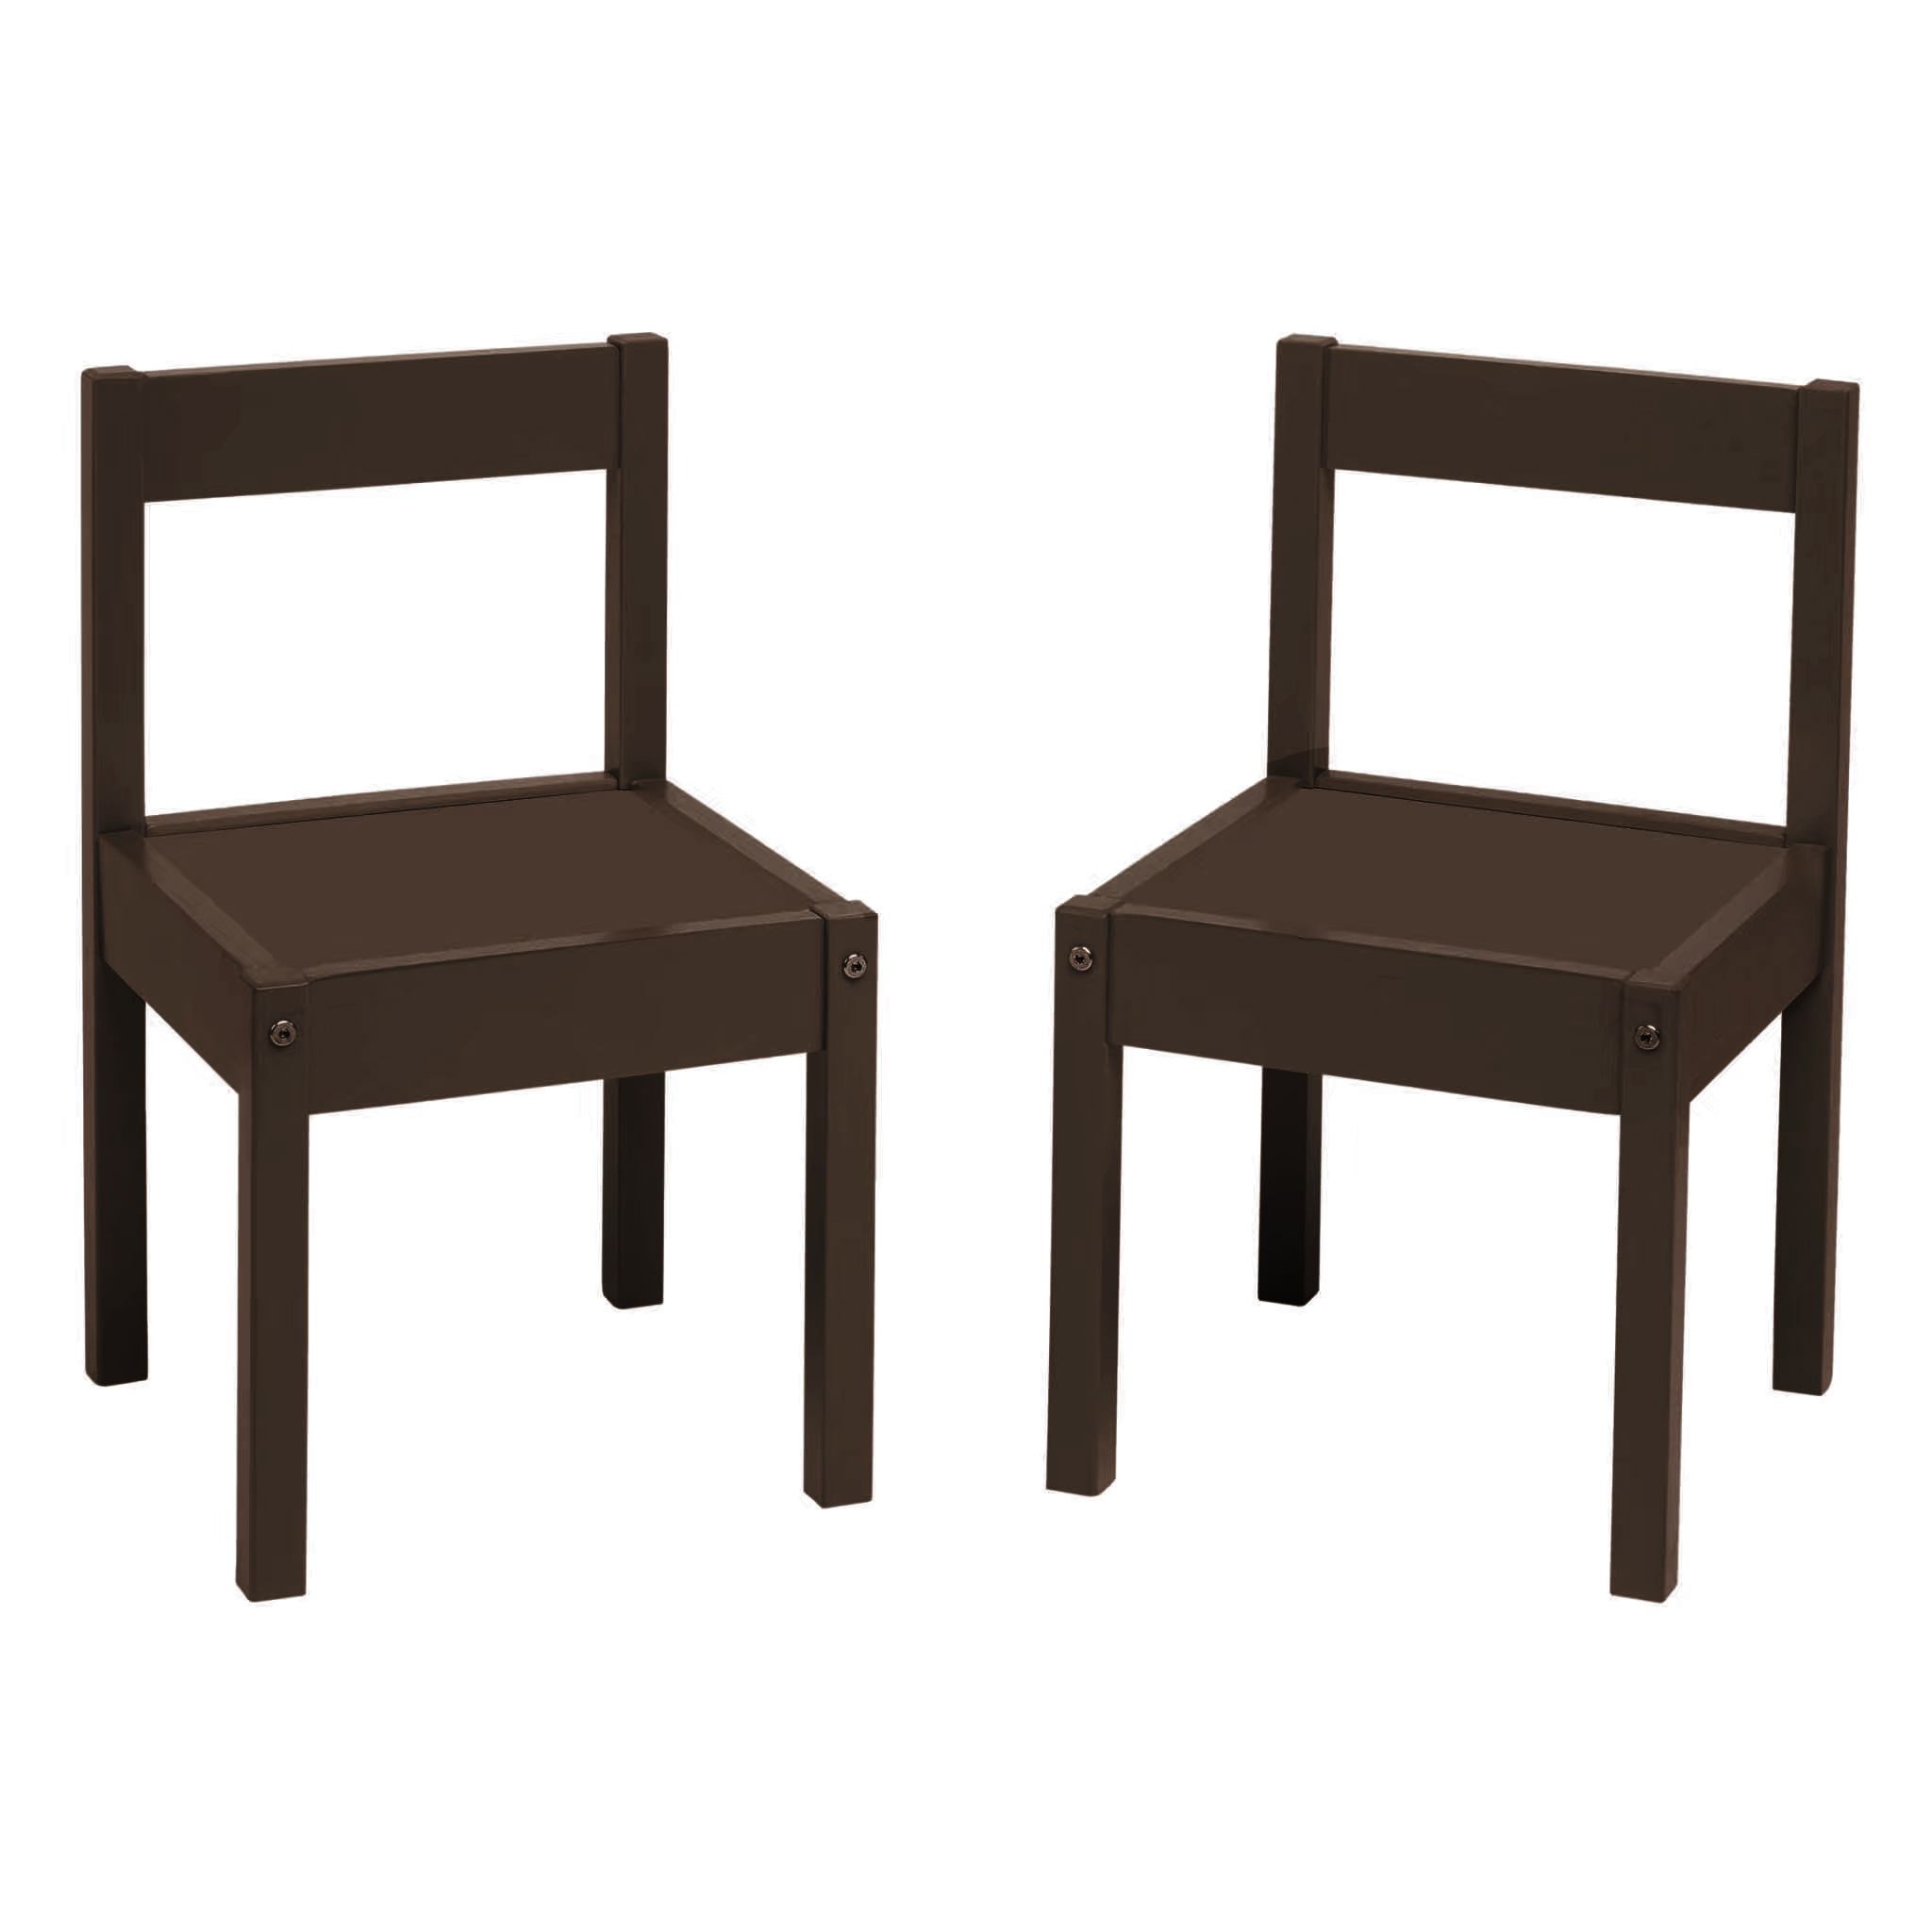 Your Zone Child 3-Piece Table and Chairs Set, in Espresso Age Group 1 to 5 Years Old. - image 2 of 6